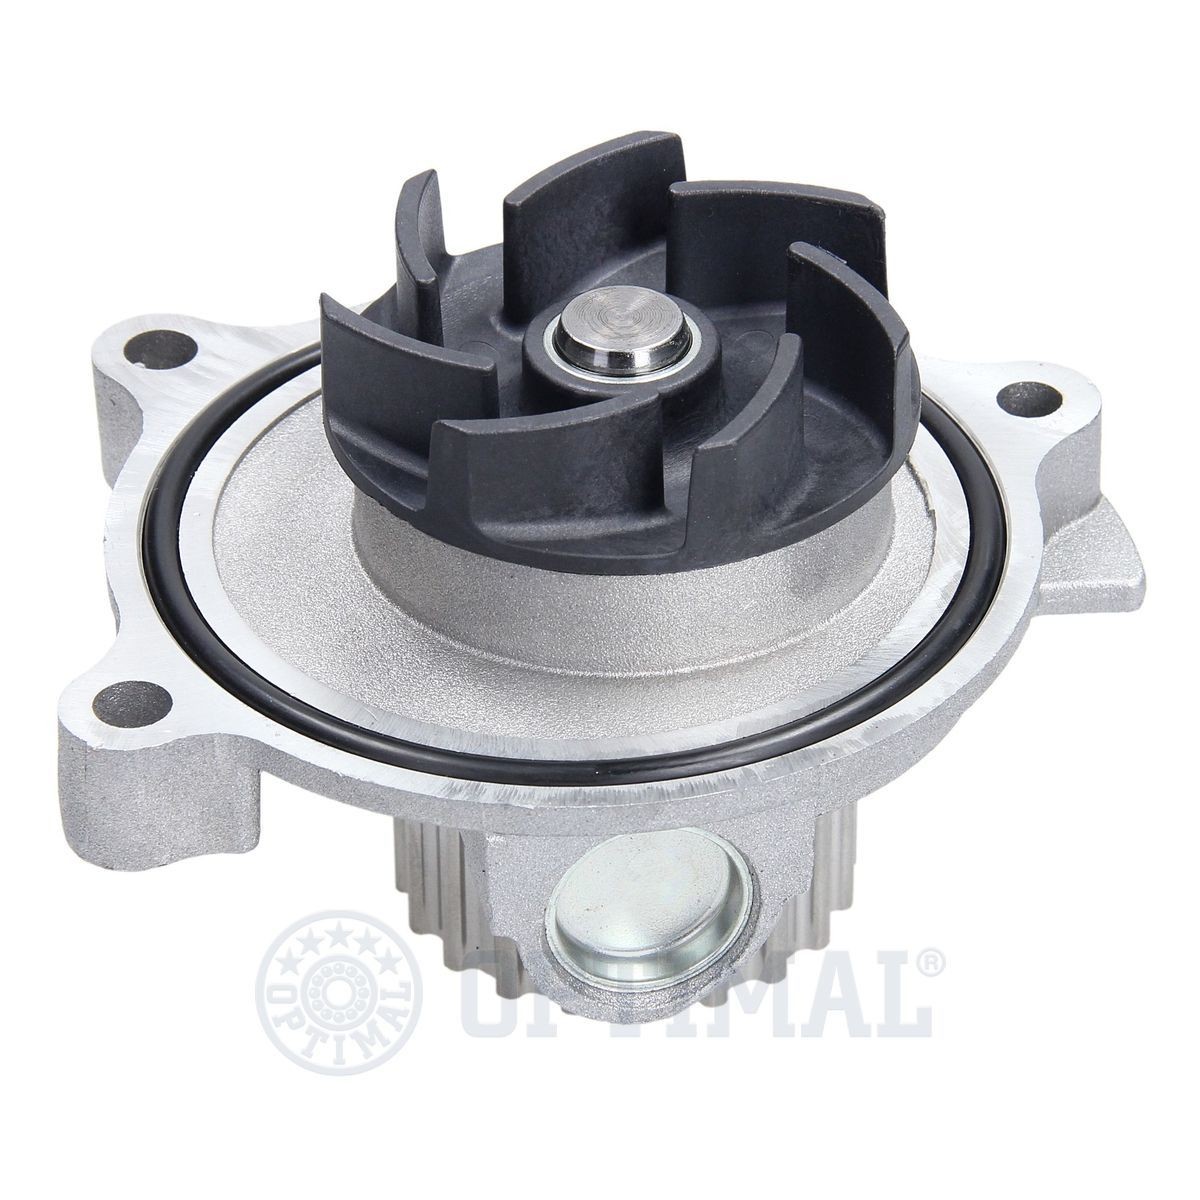 OPTIMAL Water pump for engine AQ-1085